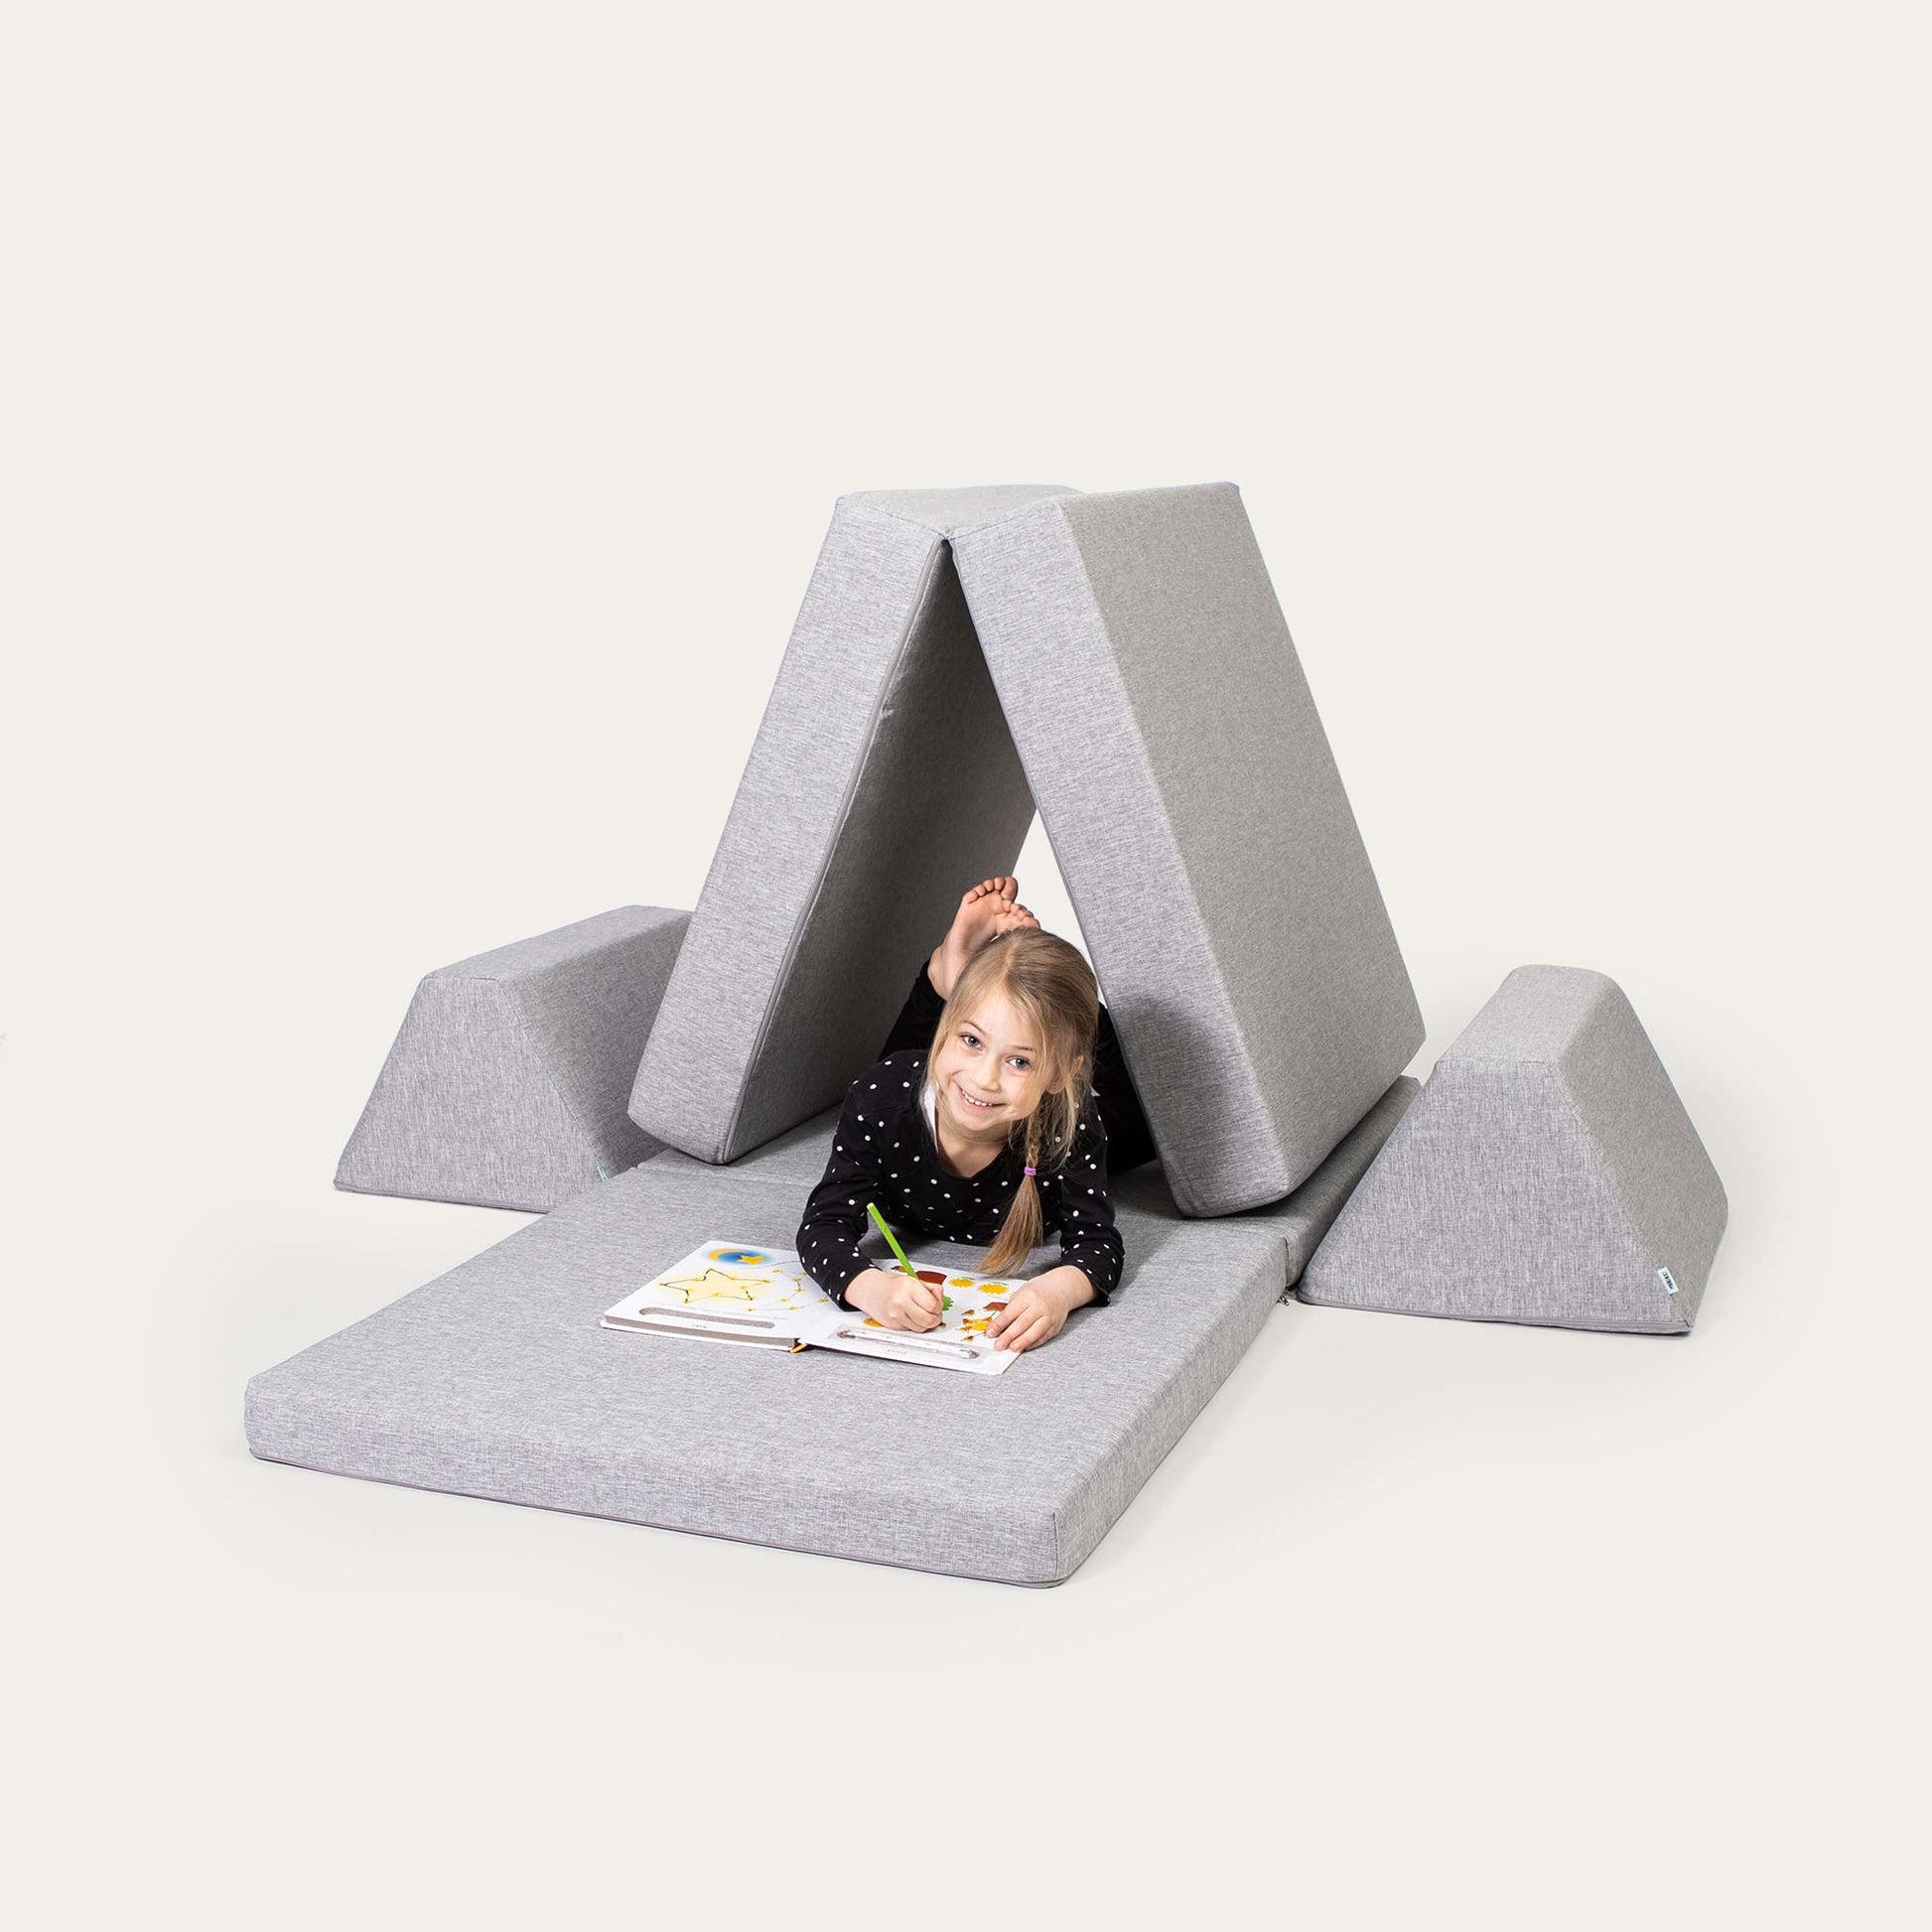 A little girl drawing in a coloring book while sleeping on a grey triangle-shaped activity sofa